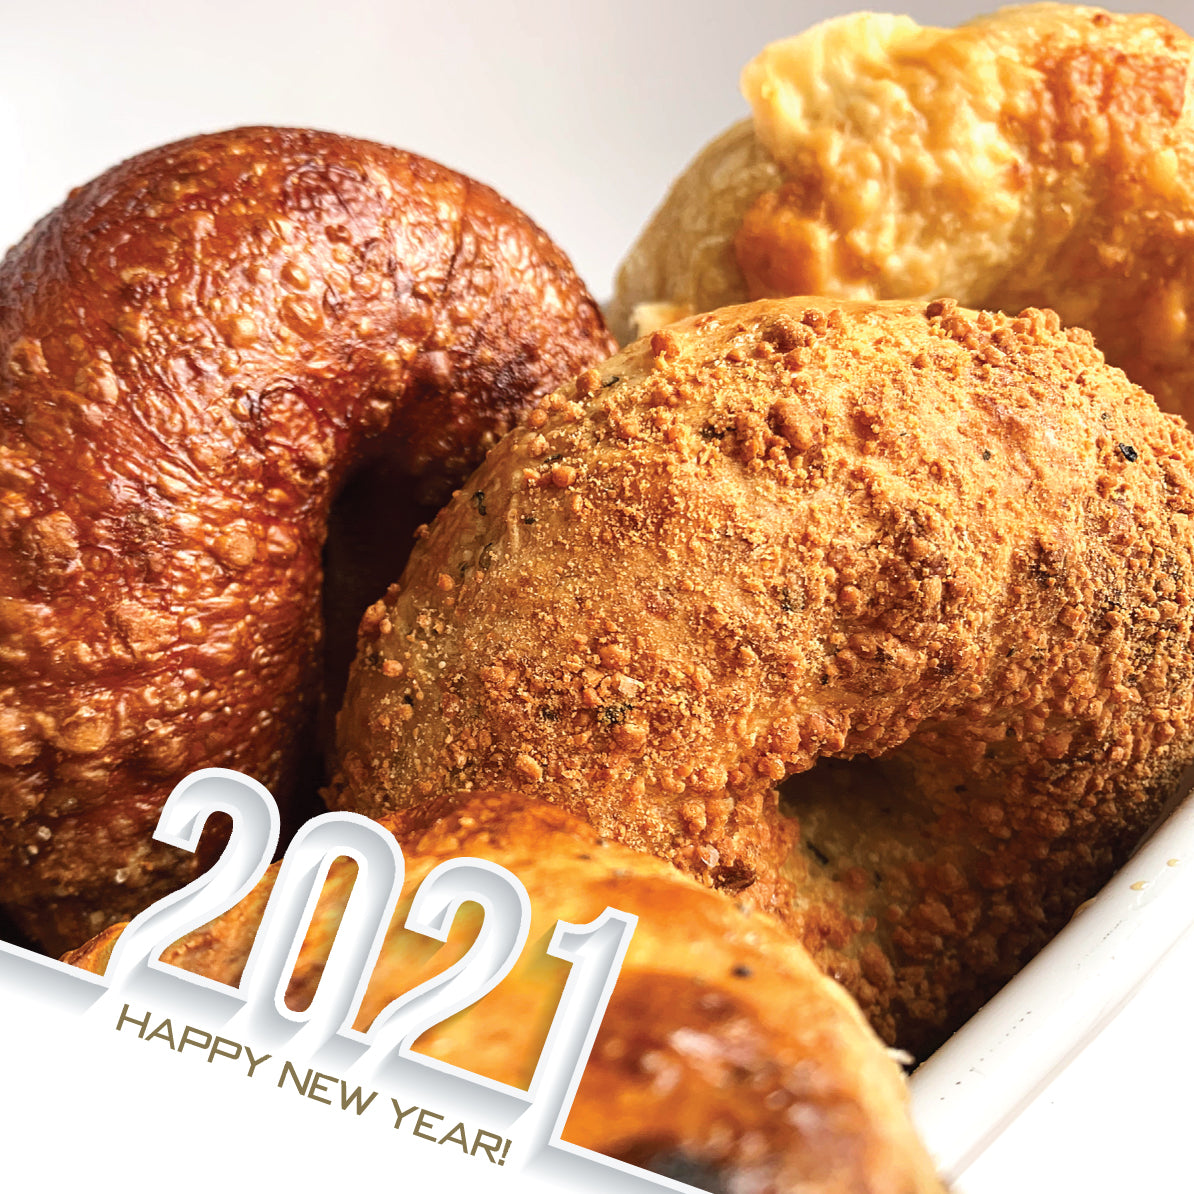 New Year's Day 2021 - Dozen Variety Pack - 8 to 10AM Delivery